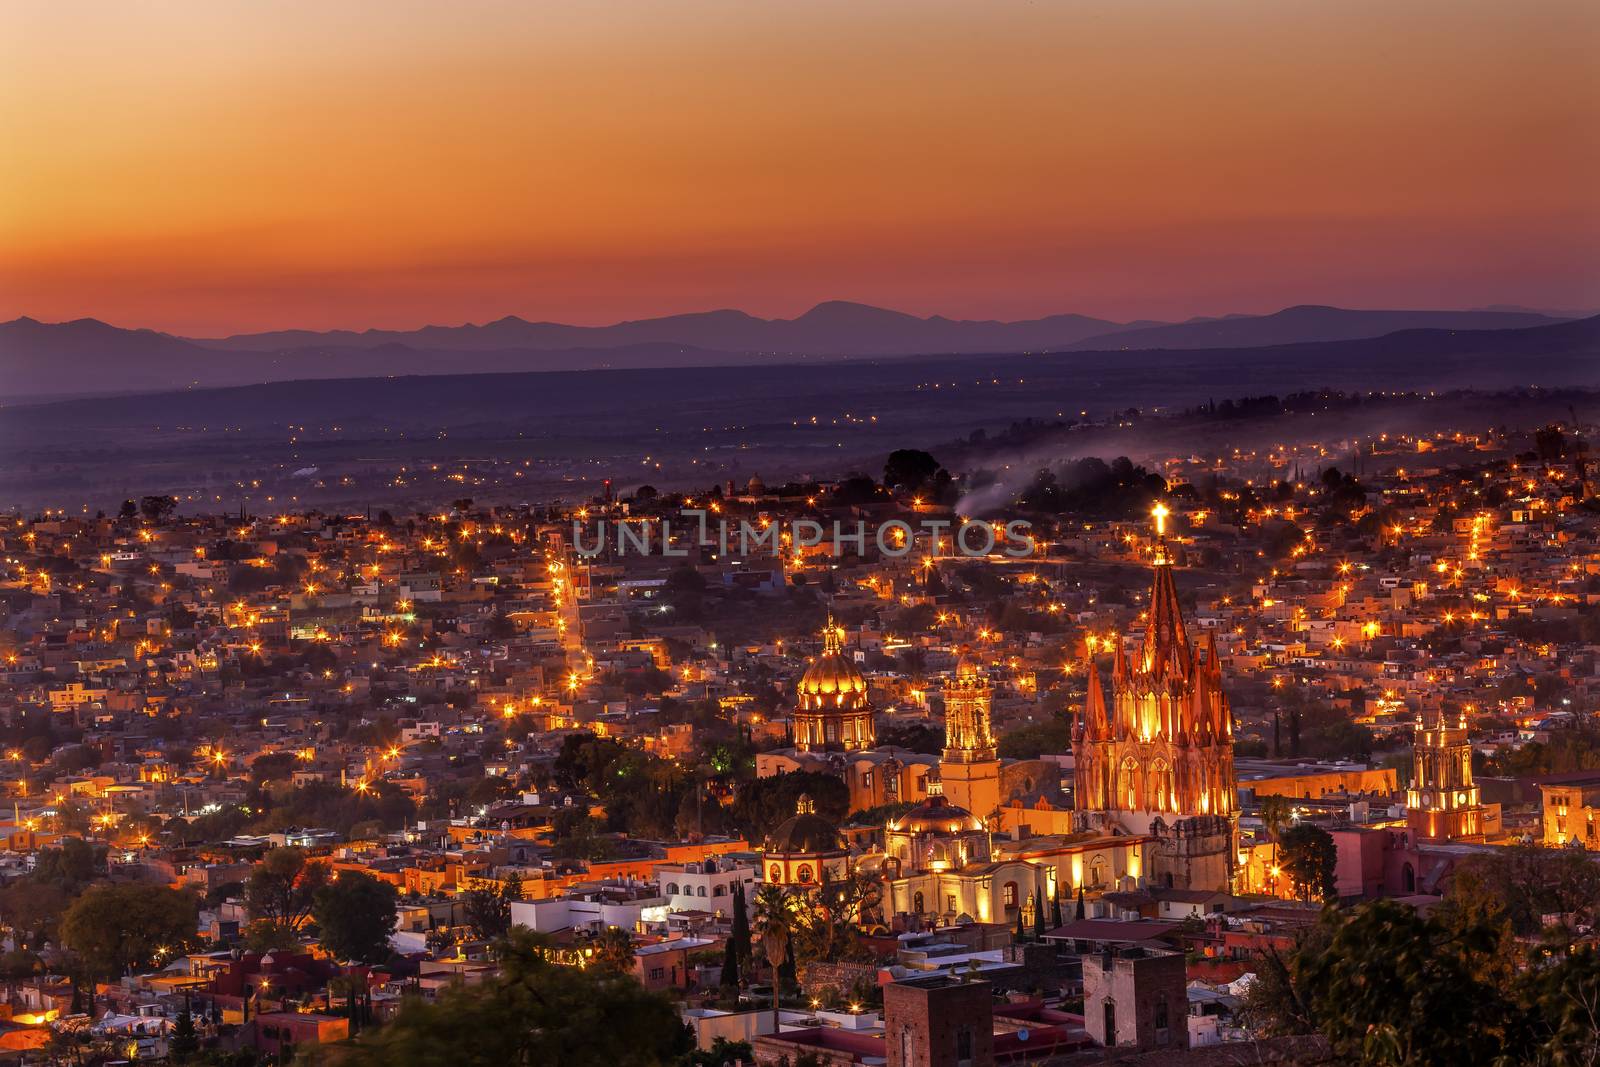 San Miguel de Allende, Mexico, Overlook Parroquia Archangel Church Close Up, Churches Houses and No Trademarks